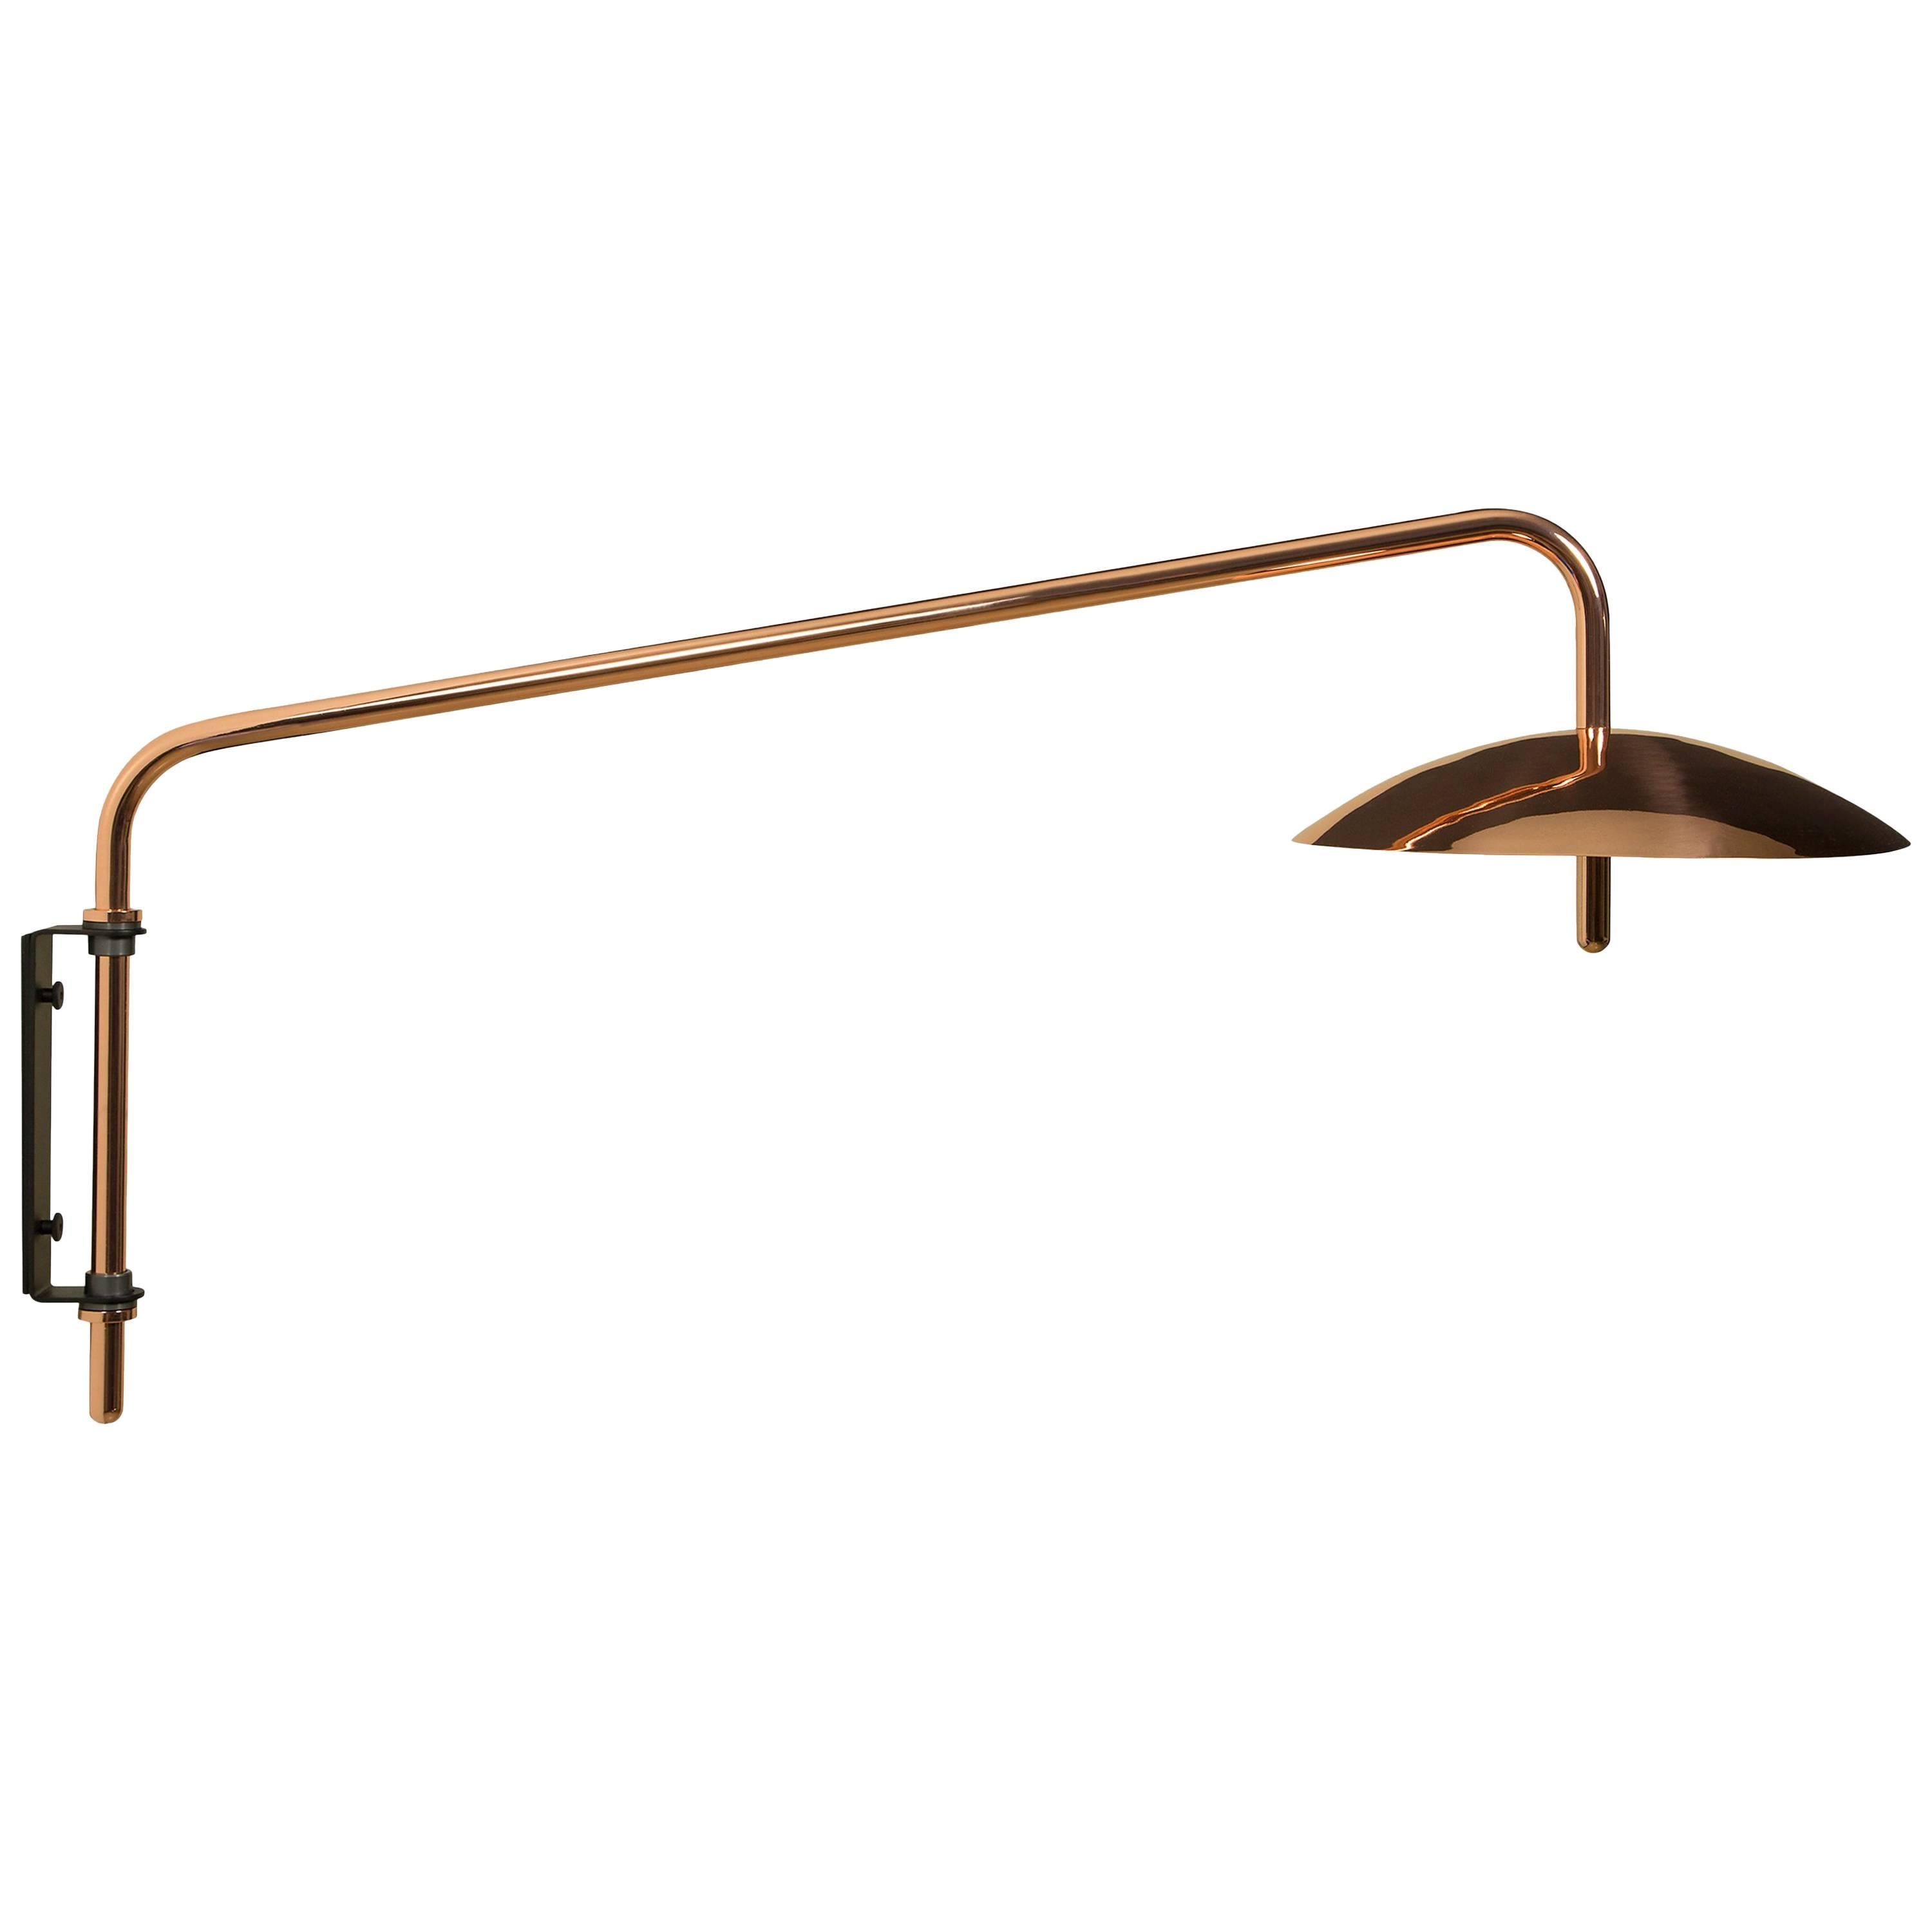 Contemporary Signal Swing Arm Sconce in Copper, Long, Hardwire, from Souda, Made to Order For Sale